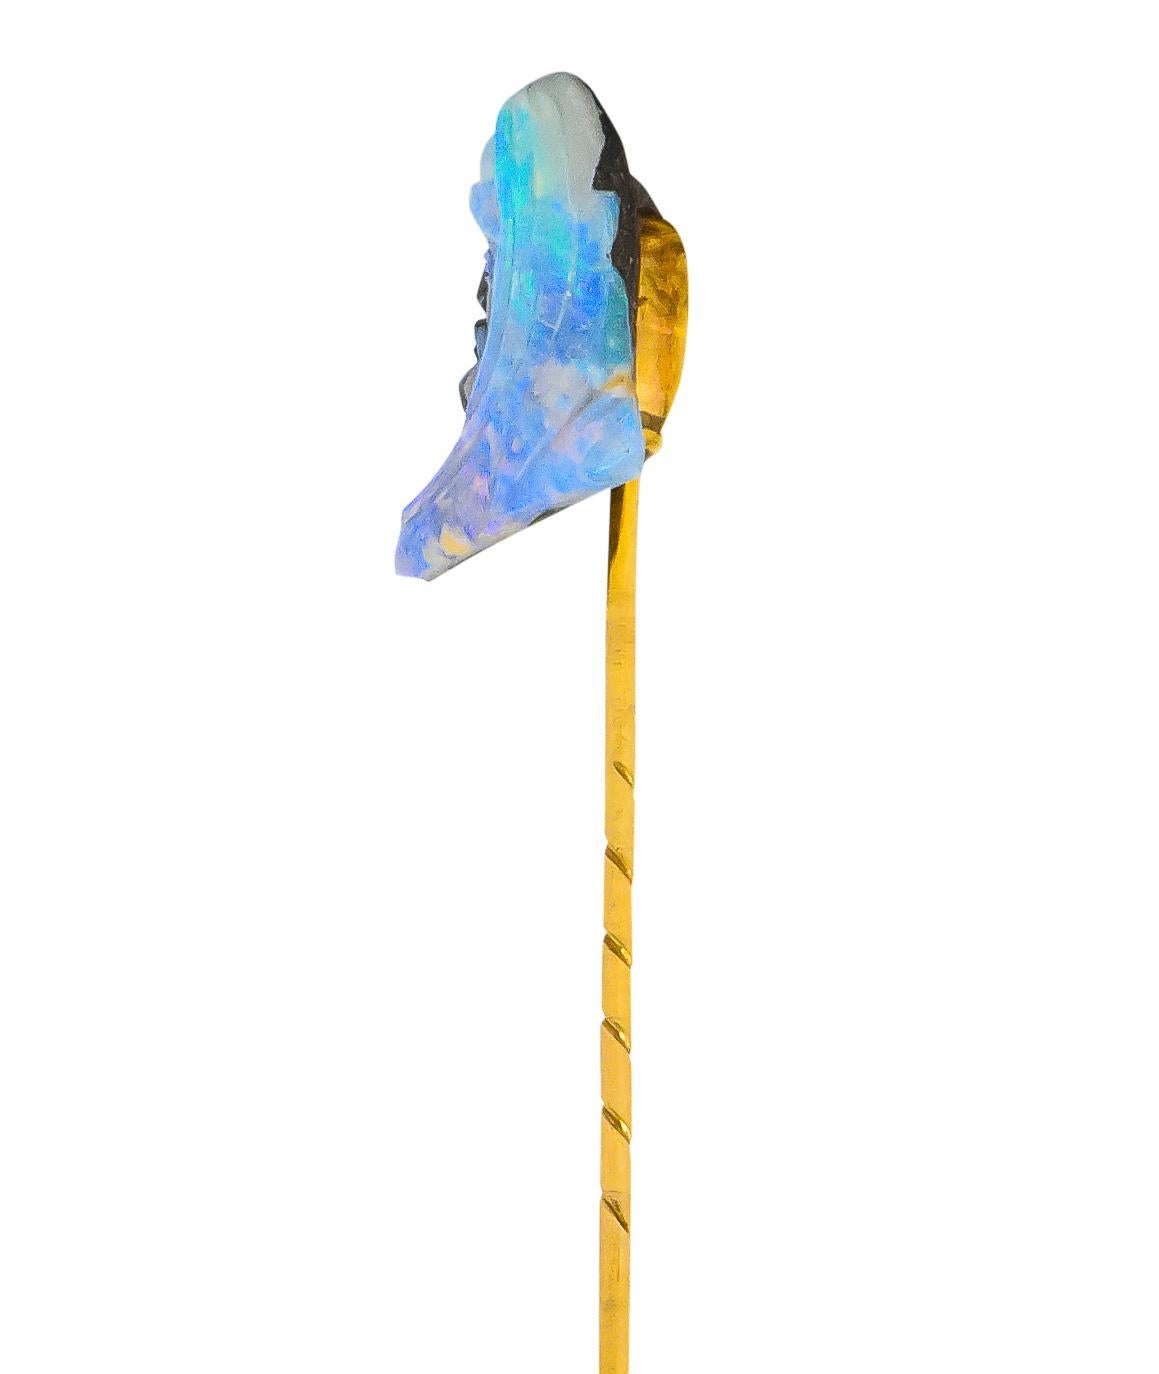 Centering a deeply carved boulder opal depicting the profile of a man with a stylized beard and a long, flowing cloth headdress

Featuring broad flashes of blue/violet spectral play-of-color 

Accented by dark brown matrix speckled with white along